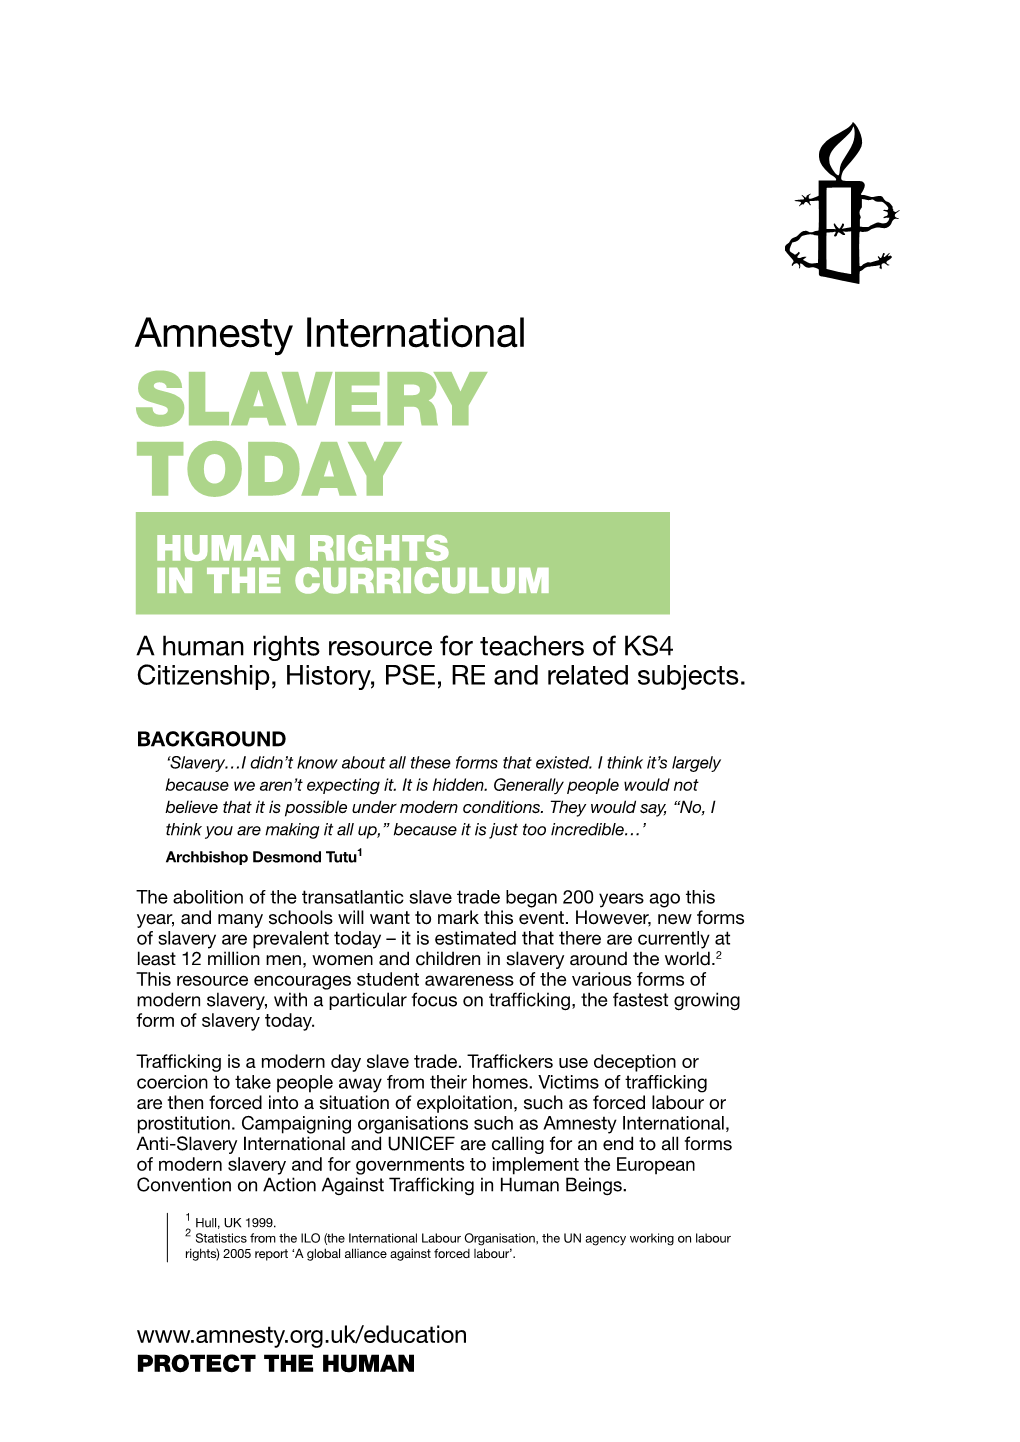 SLAVERY TODAY Human Rights in the Curriculum